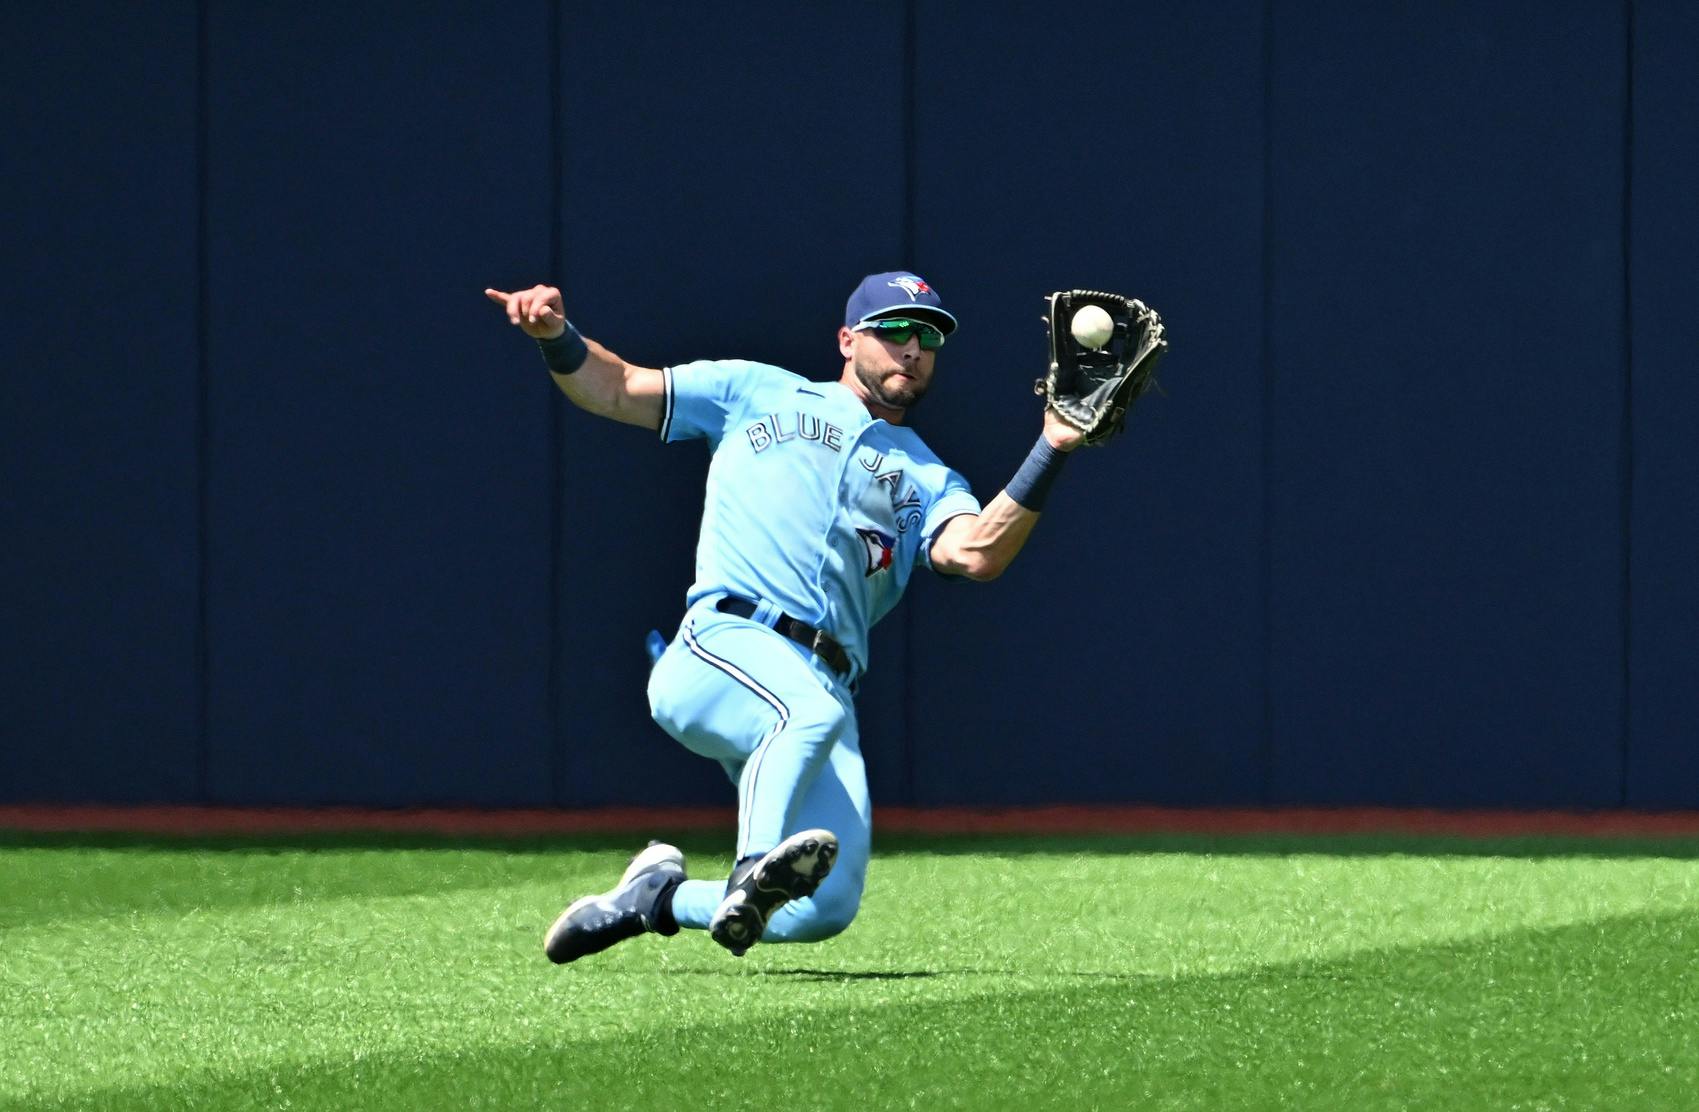 Kevin Kiermaier talks about free agency, playing on turf, and